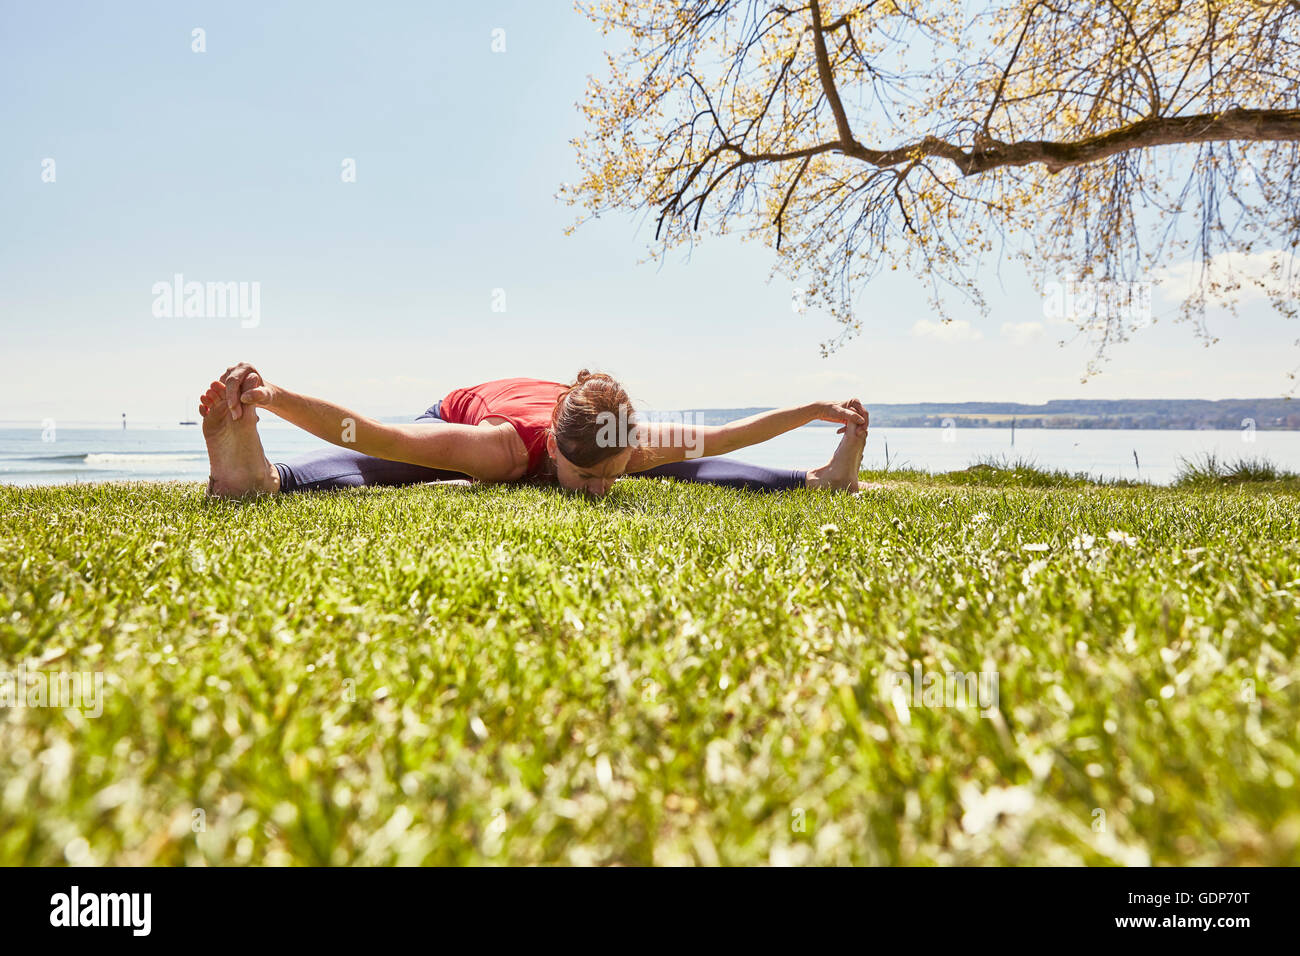 Woman bending forward in yoga position, touching toes Stock Photo